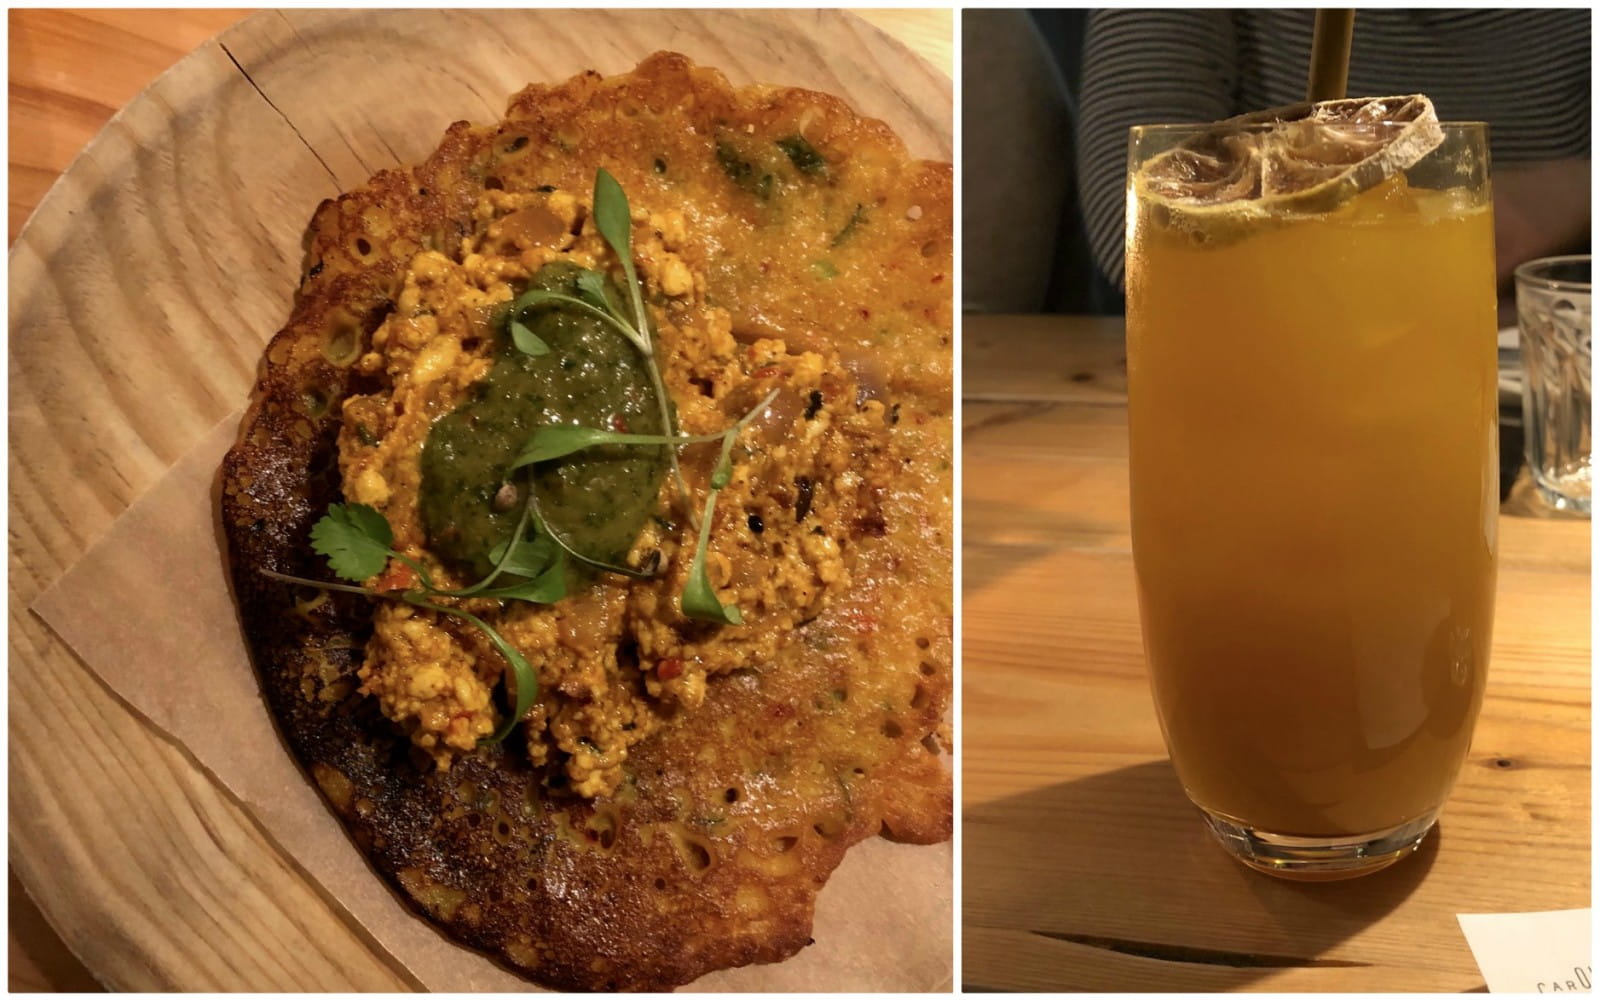 Spicy paneer pancakes and a ginger-turmeric soda